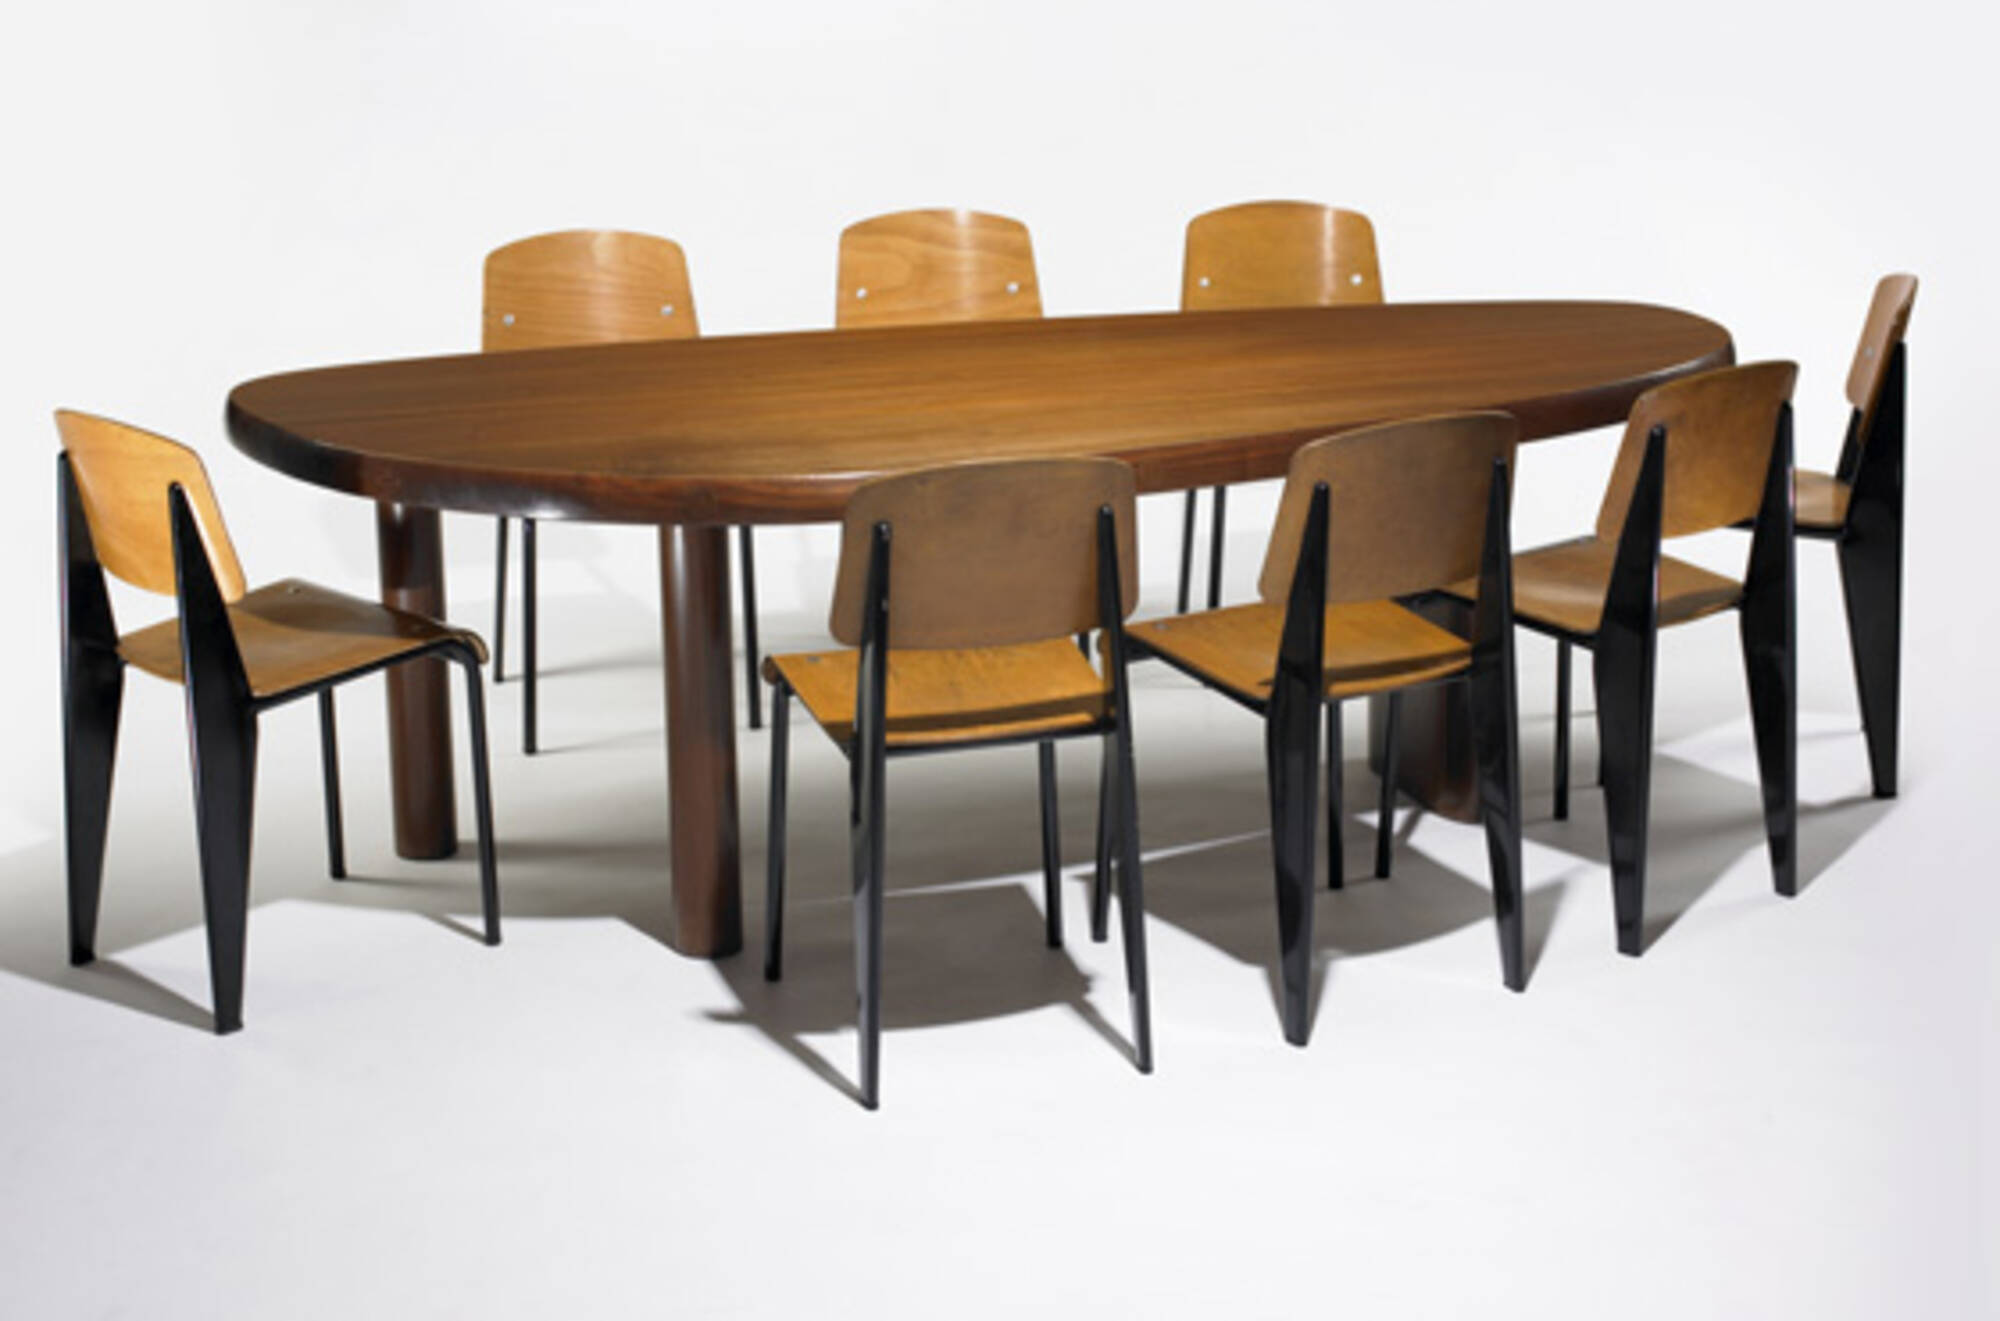 Table En Forme Libre by Charlotte Perriand